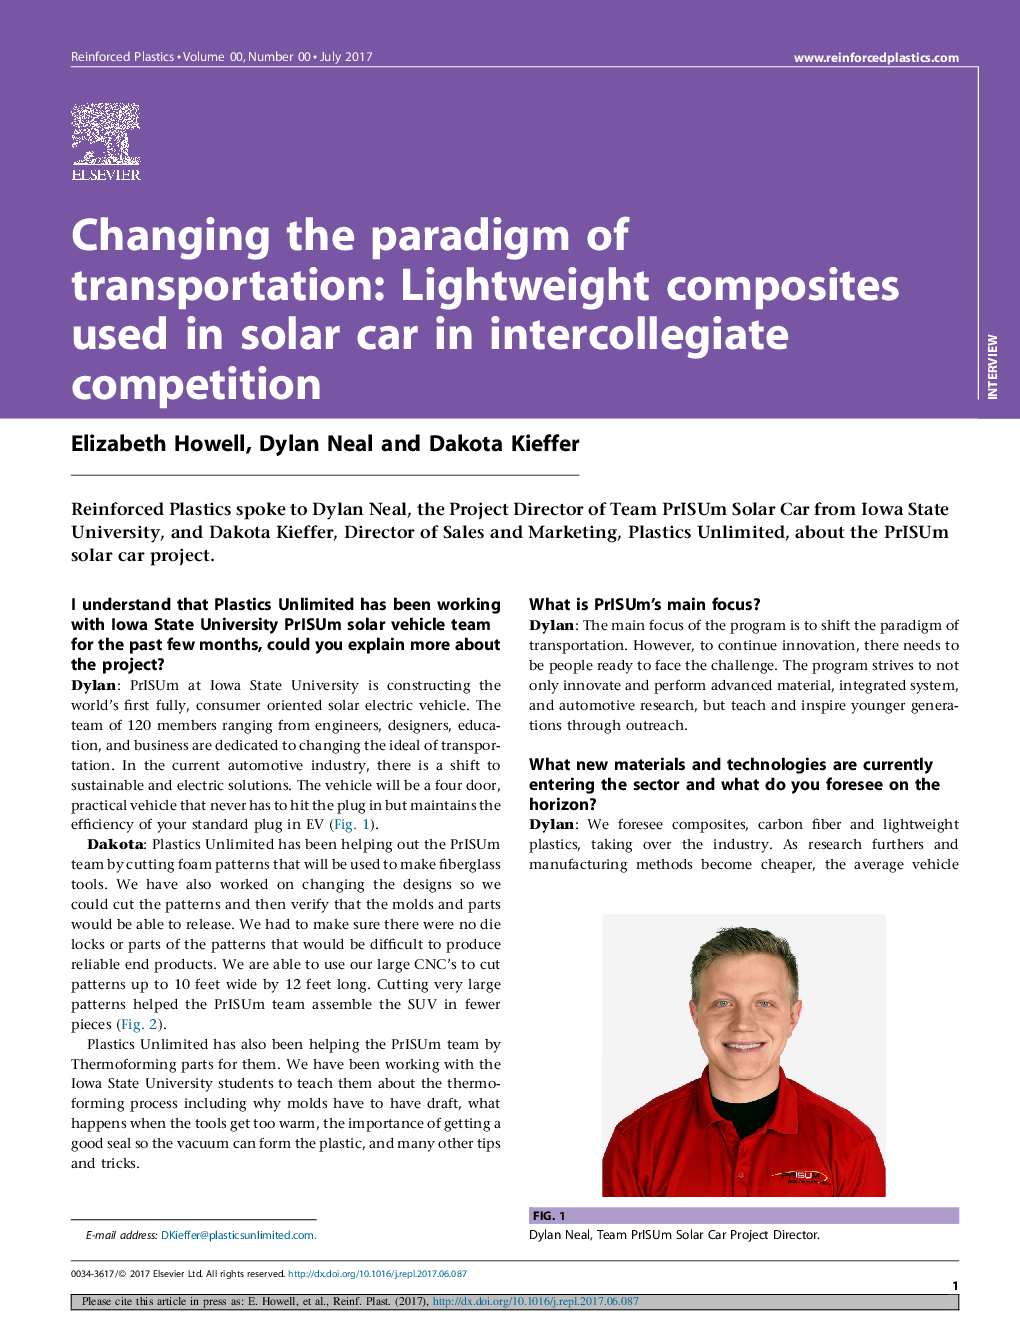 Changing the paradigm of transportation: Lightweight composites used in solar car in intercollegiate competition